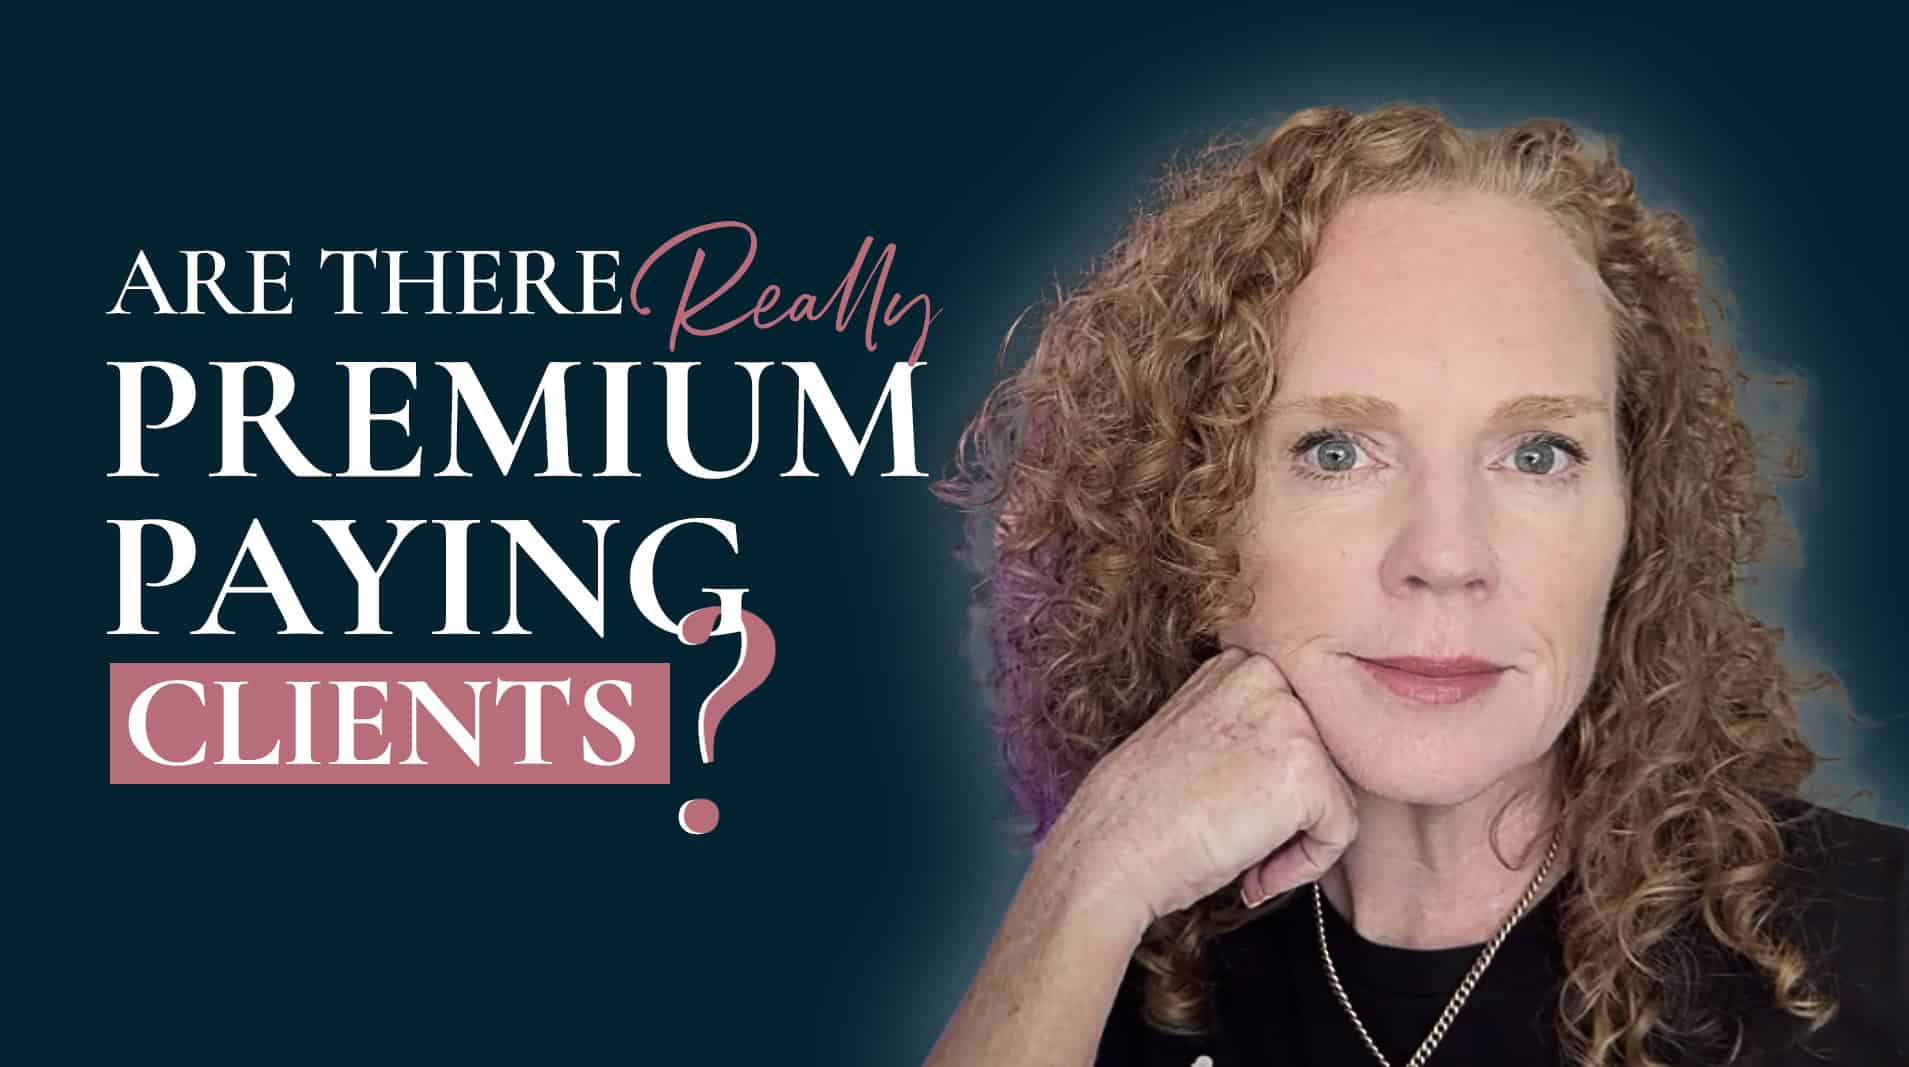 Are There Really Premium Paying Clients?